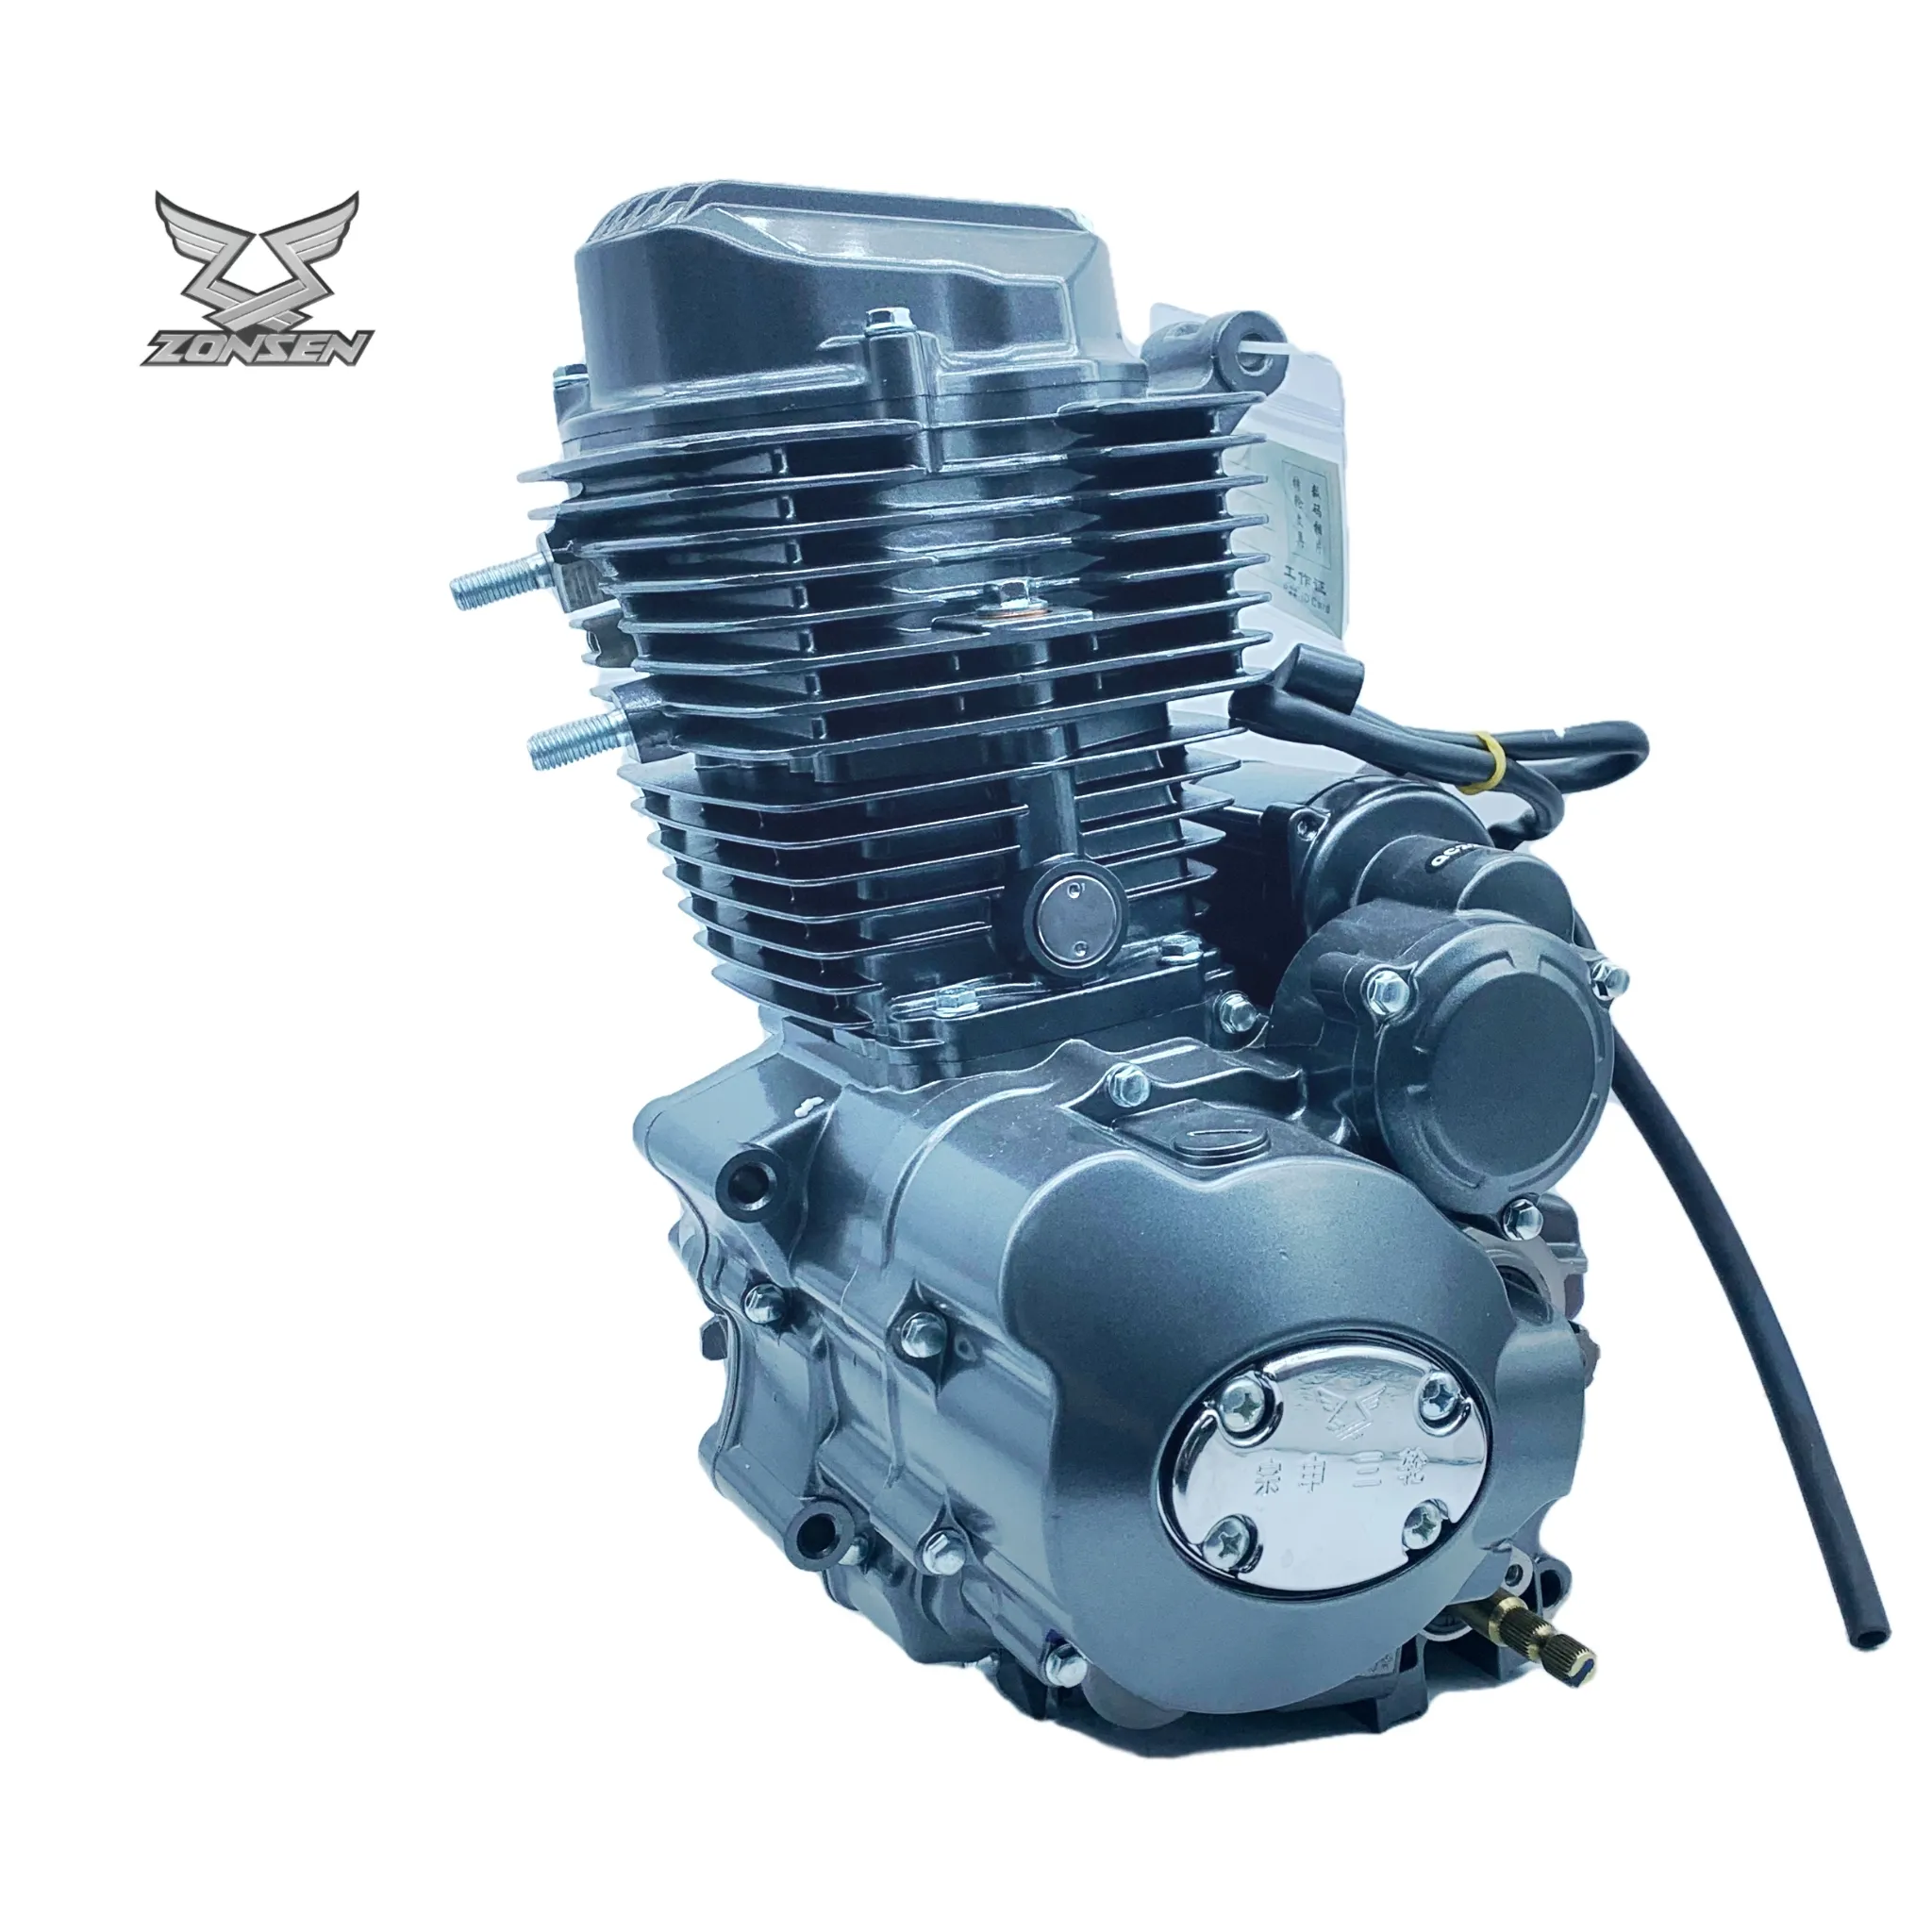 High quality motorcycle engine spare parts Zongshen 175cc engine fuel tricycle cargo motorcycle engine assembly 175cc